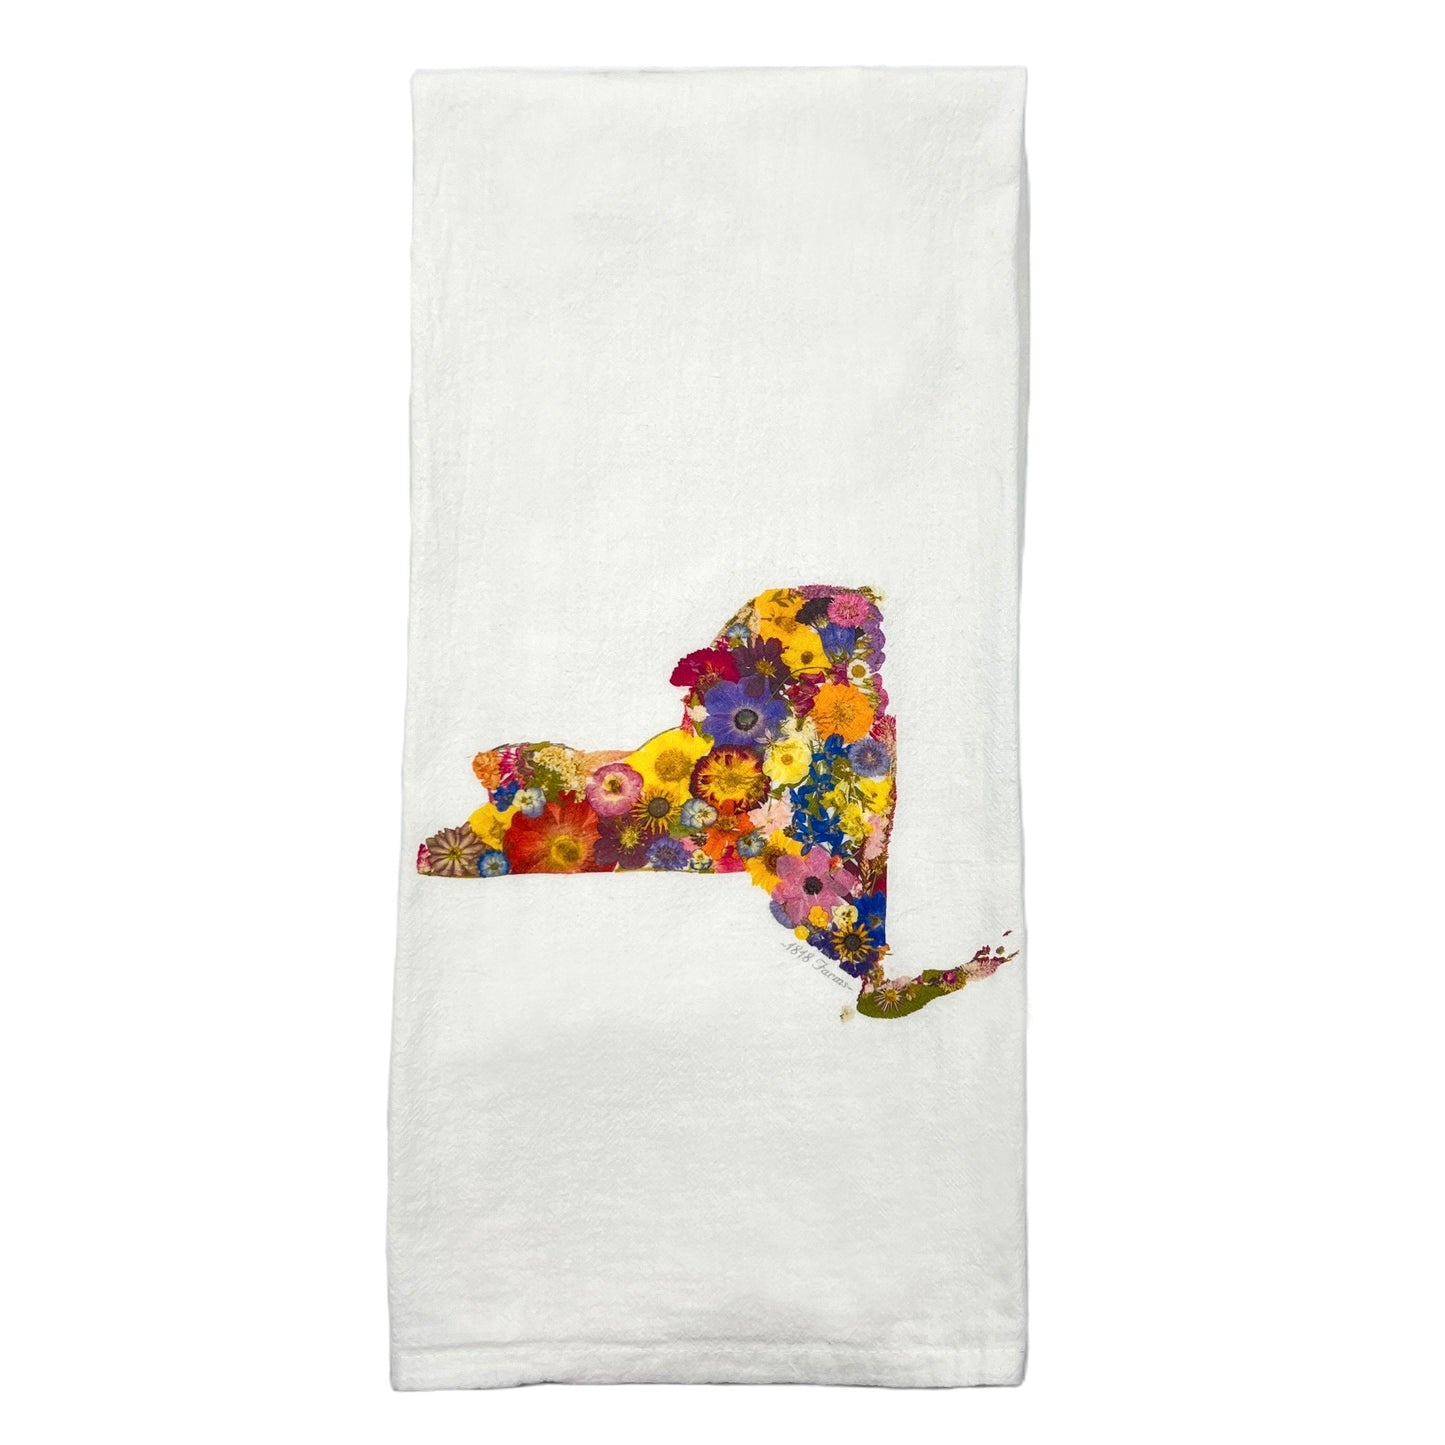 State Themed Flour Sack Towel  - "Where I Bloom" Collection Towel 1818 Farms New York  